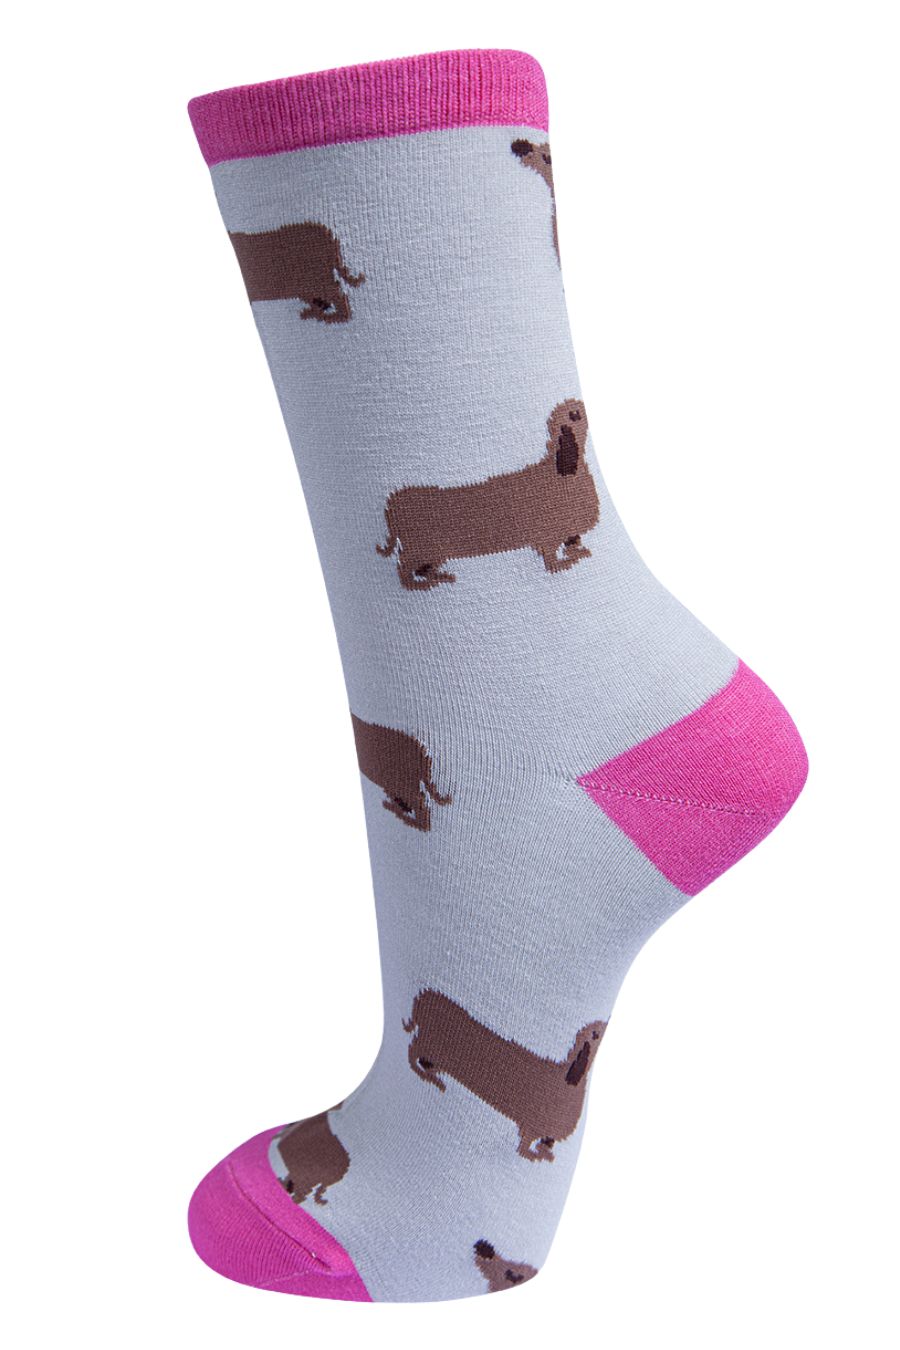 grey and hot pink bamboo socks featuring miniature dachshunds